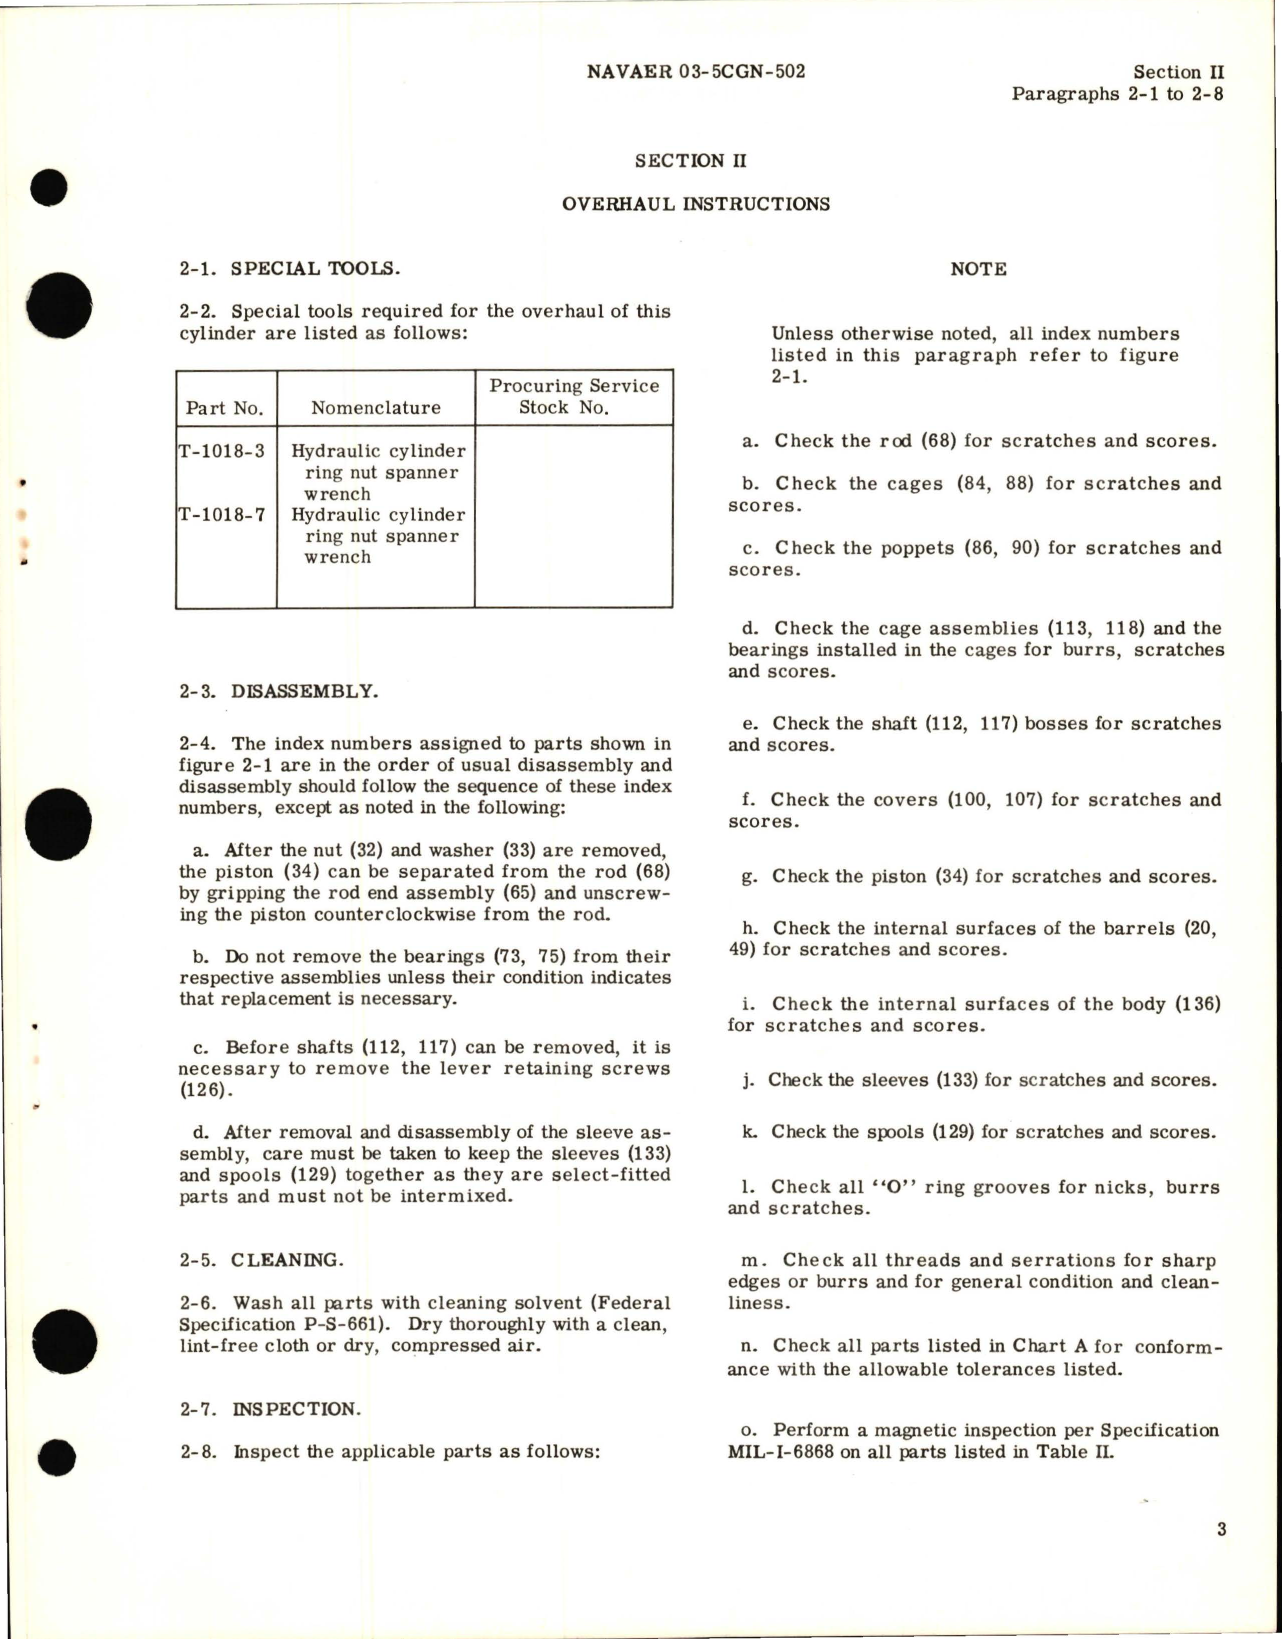 Sample page 5 from AirCorps Library document: Overhaul Instructions for Hydraulic Stabilizer Flight Control Actuating Cylinder Assembly - Part 187-58706-9